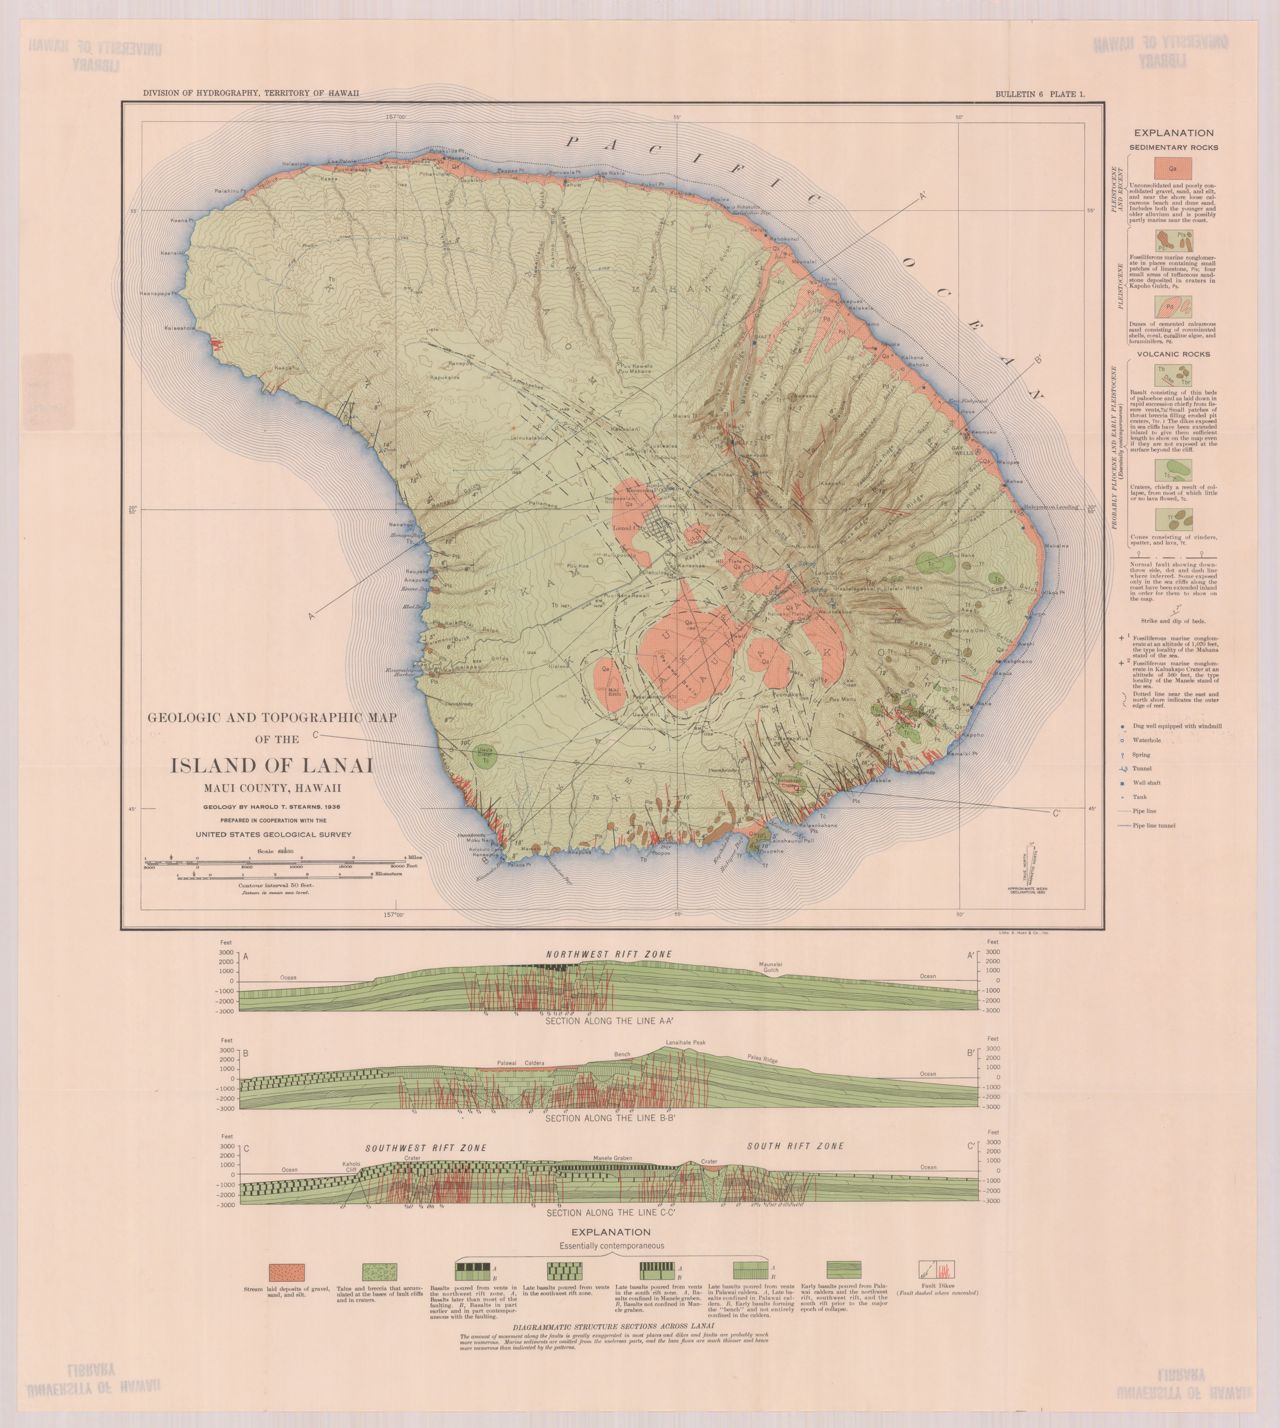 1936 Geologic and Topographic Map of the Island of Lanai